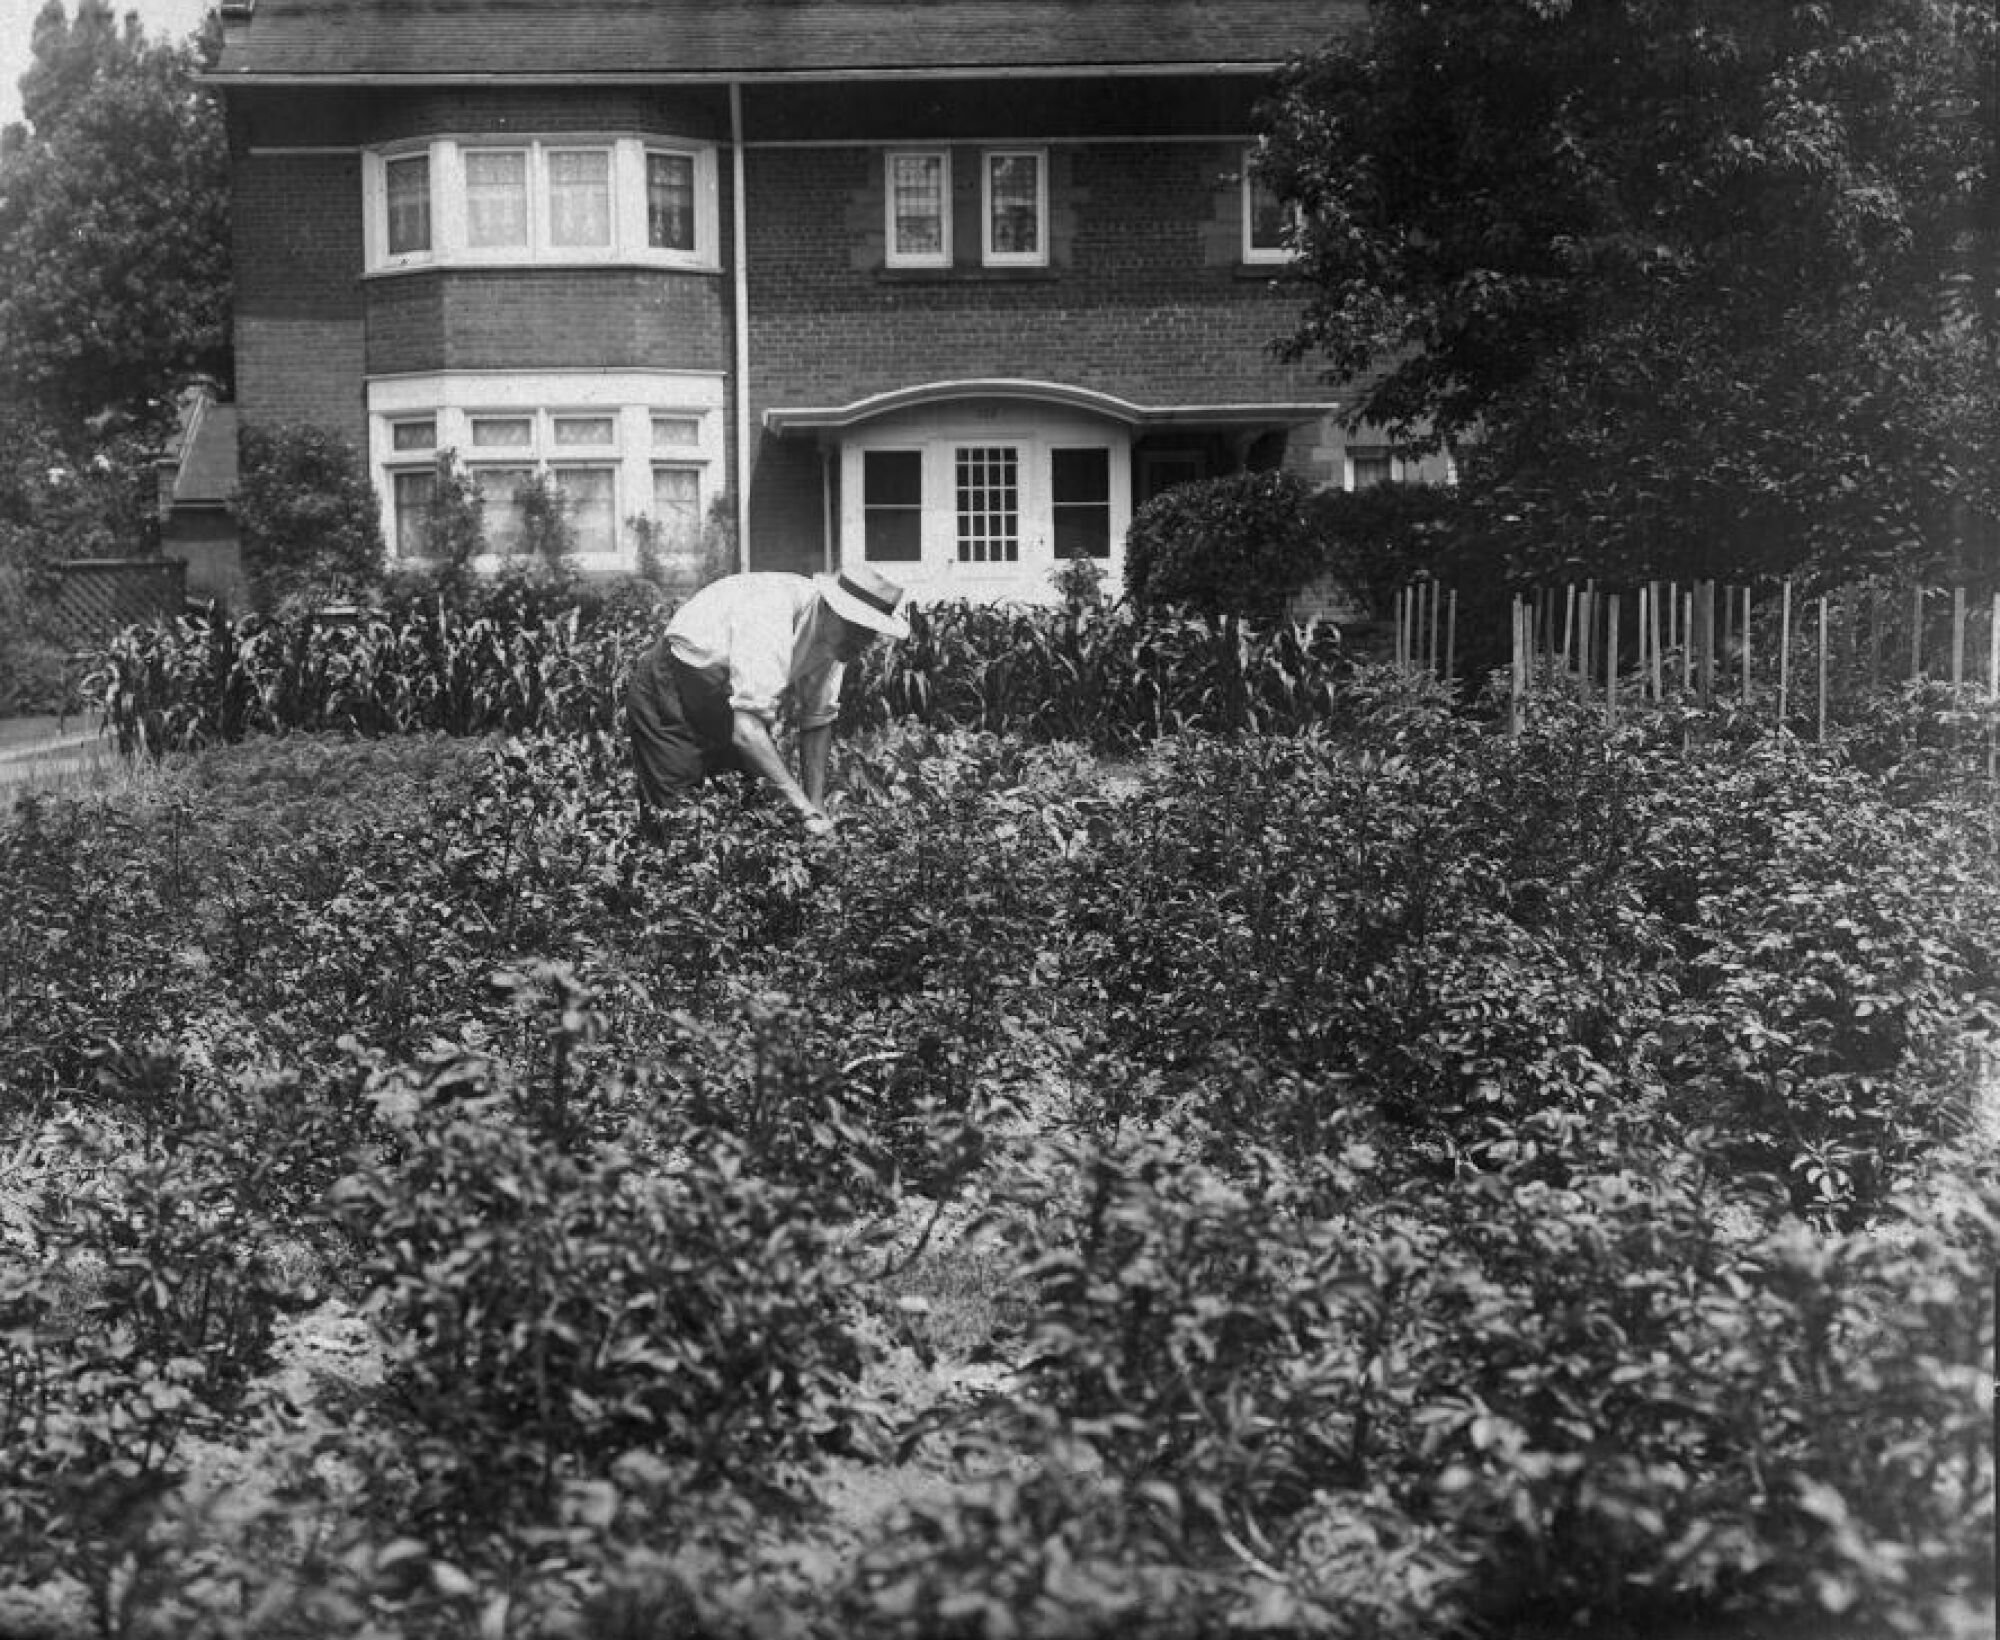 Black and white image of a man tending to a lush vegetable garden. There is a house in the background and a road off to the side.